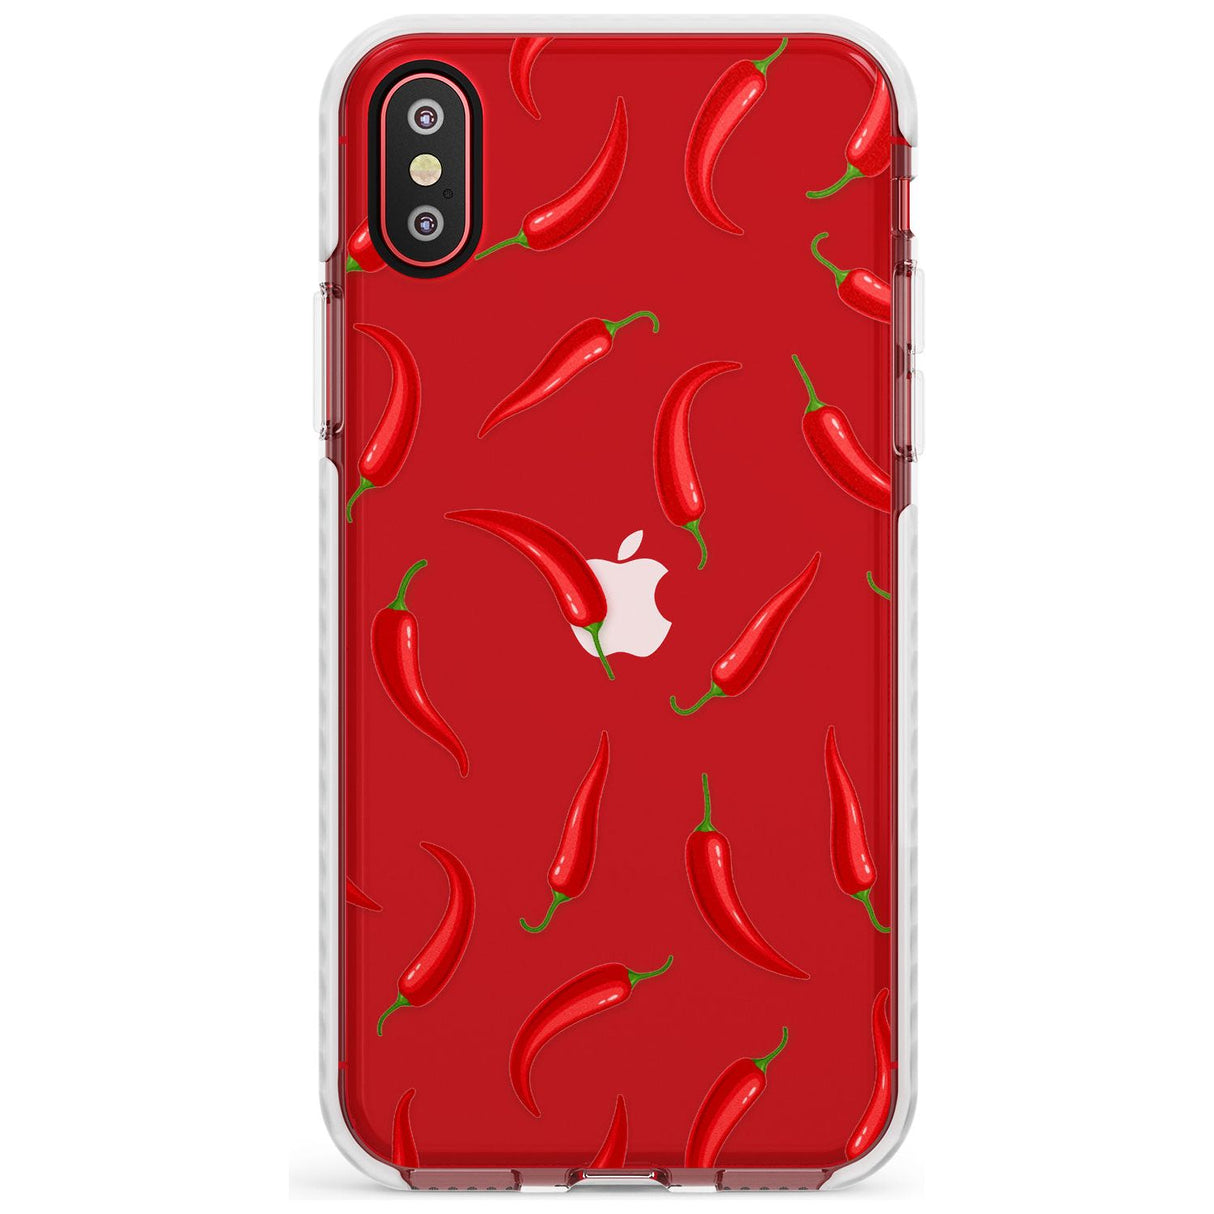 Chilly Pattern Impact Phone Case for iPhone X XS Max XR